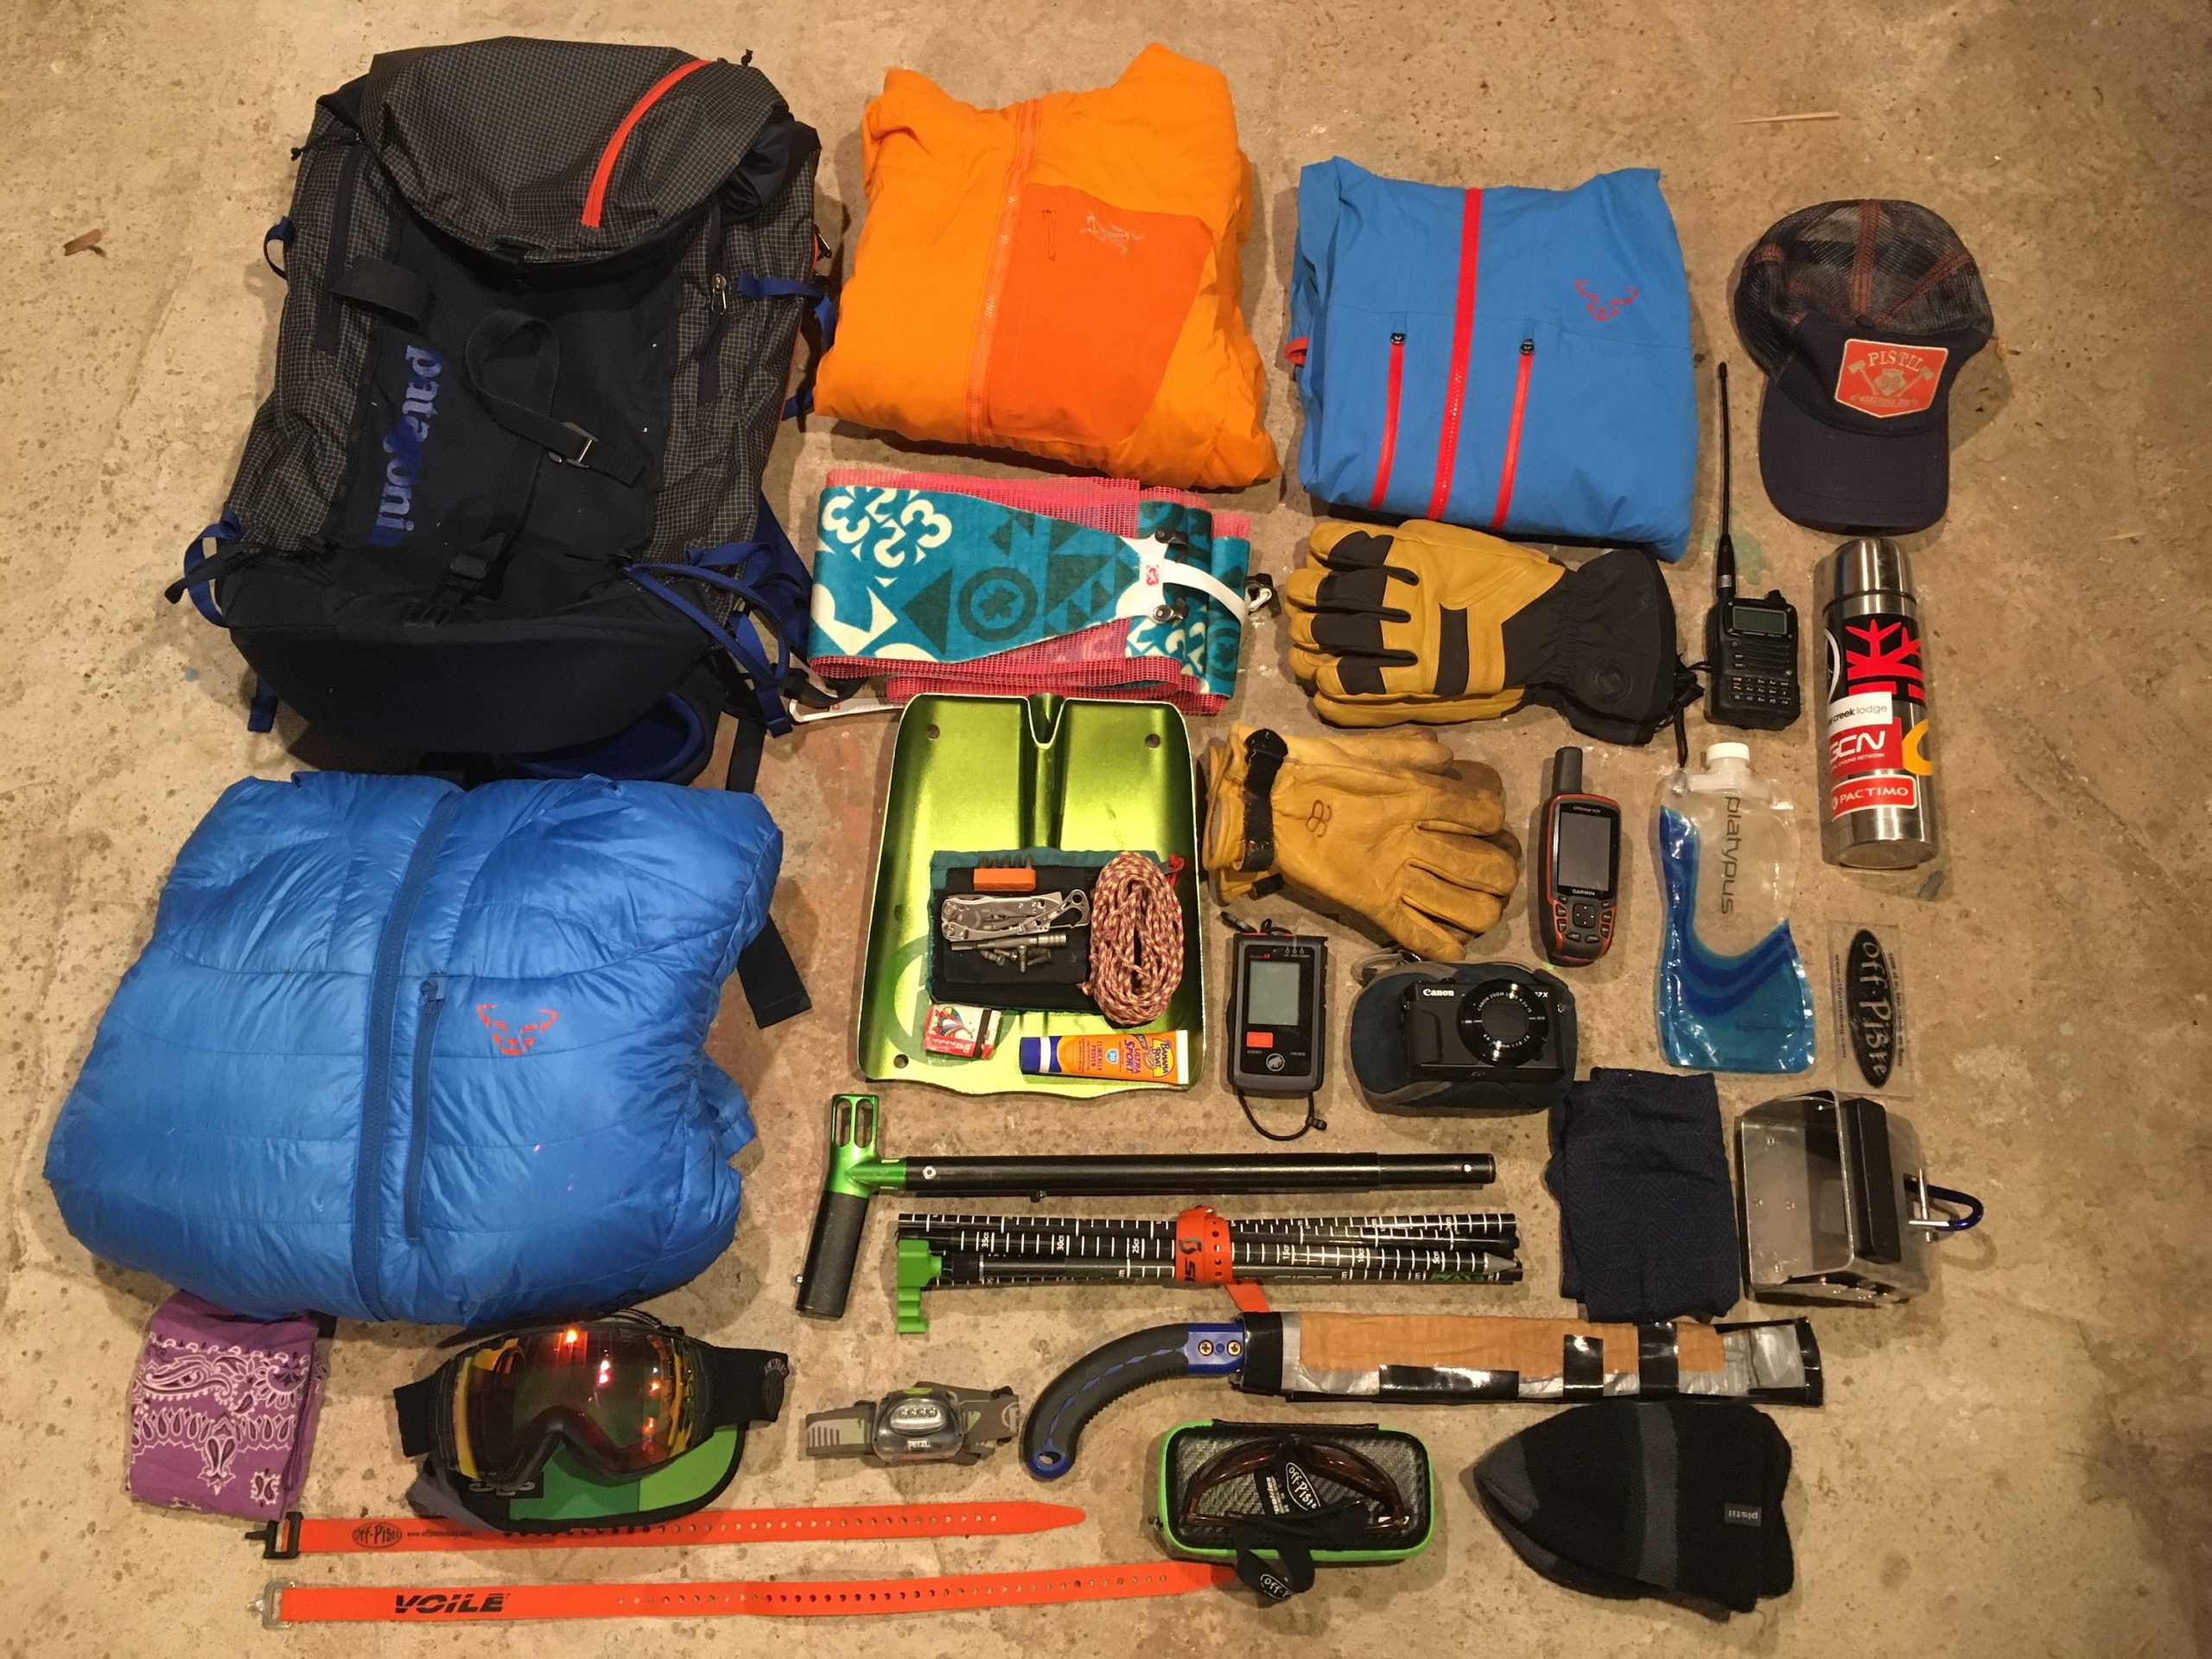 What's in Your Pack - Backcountry Ski Packing List